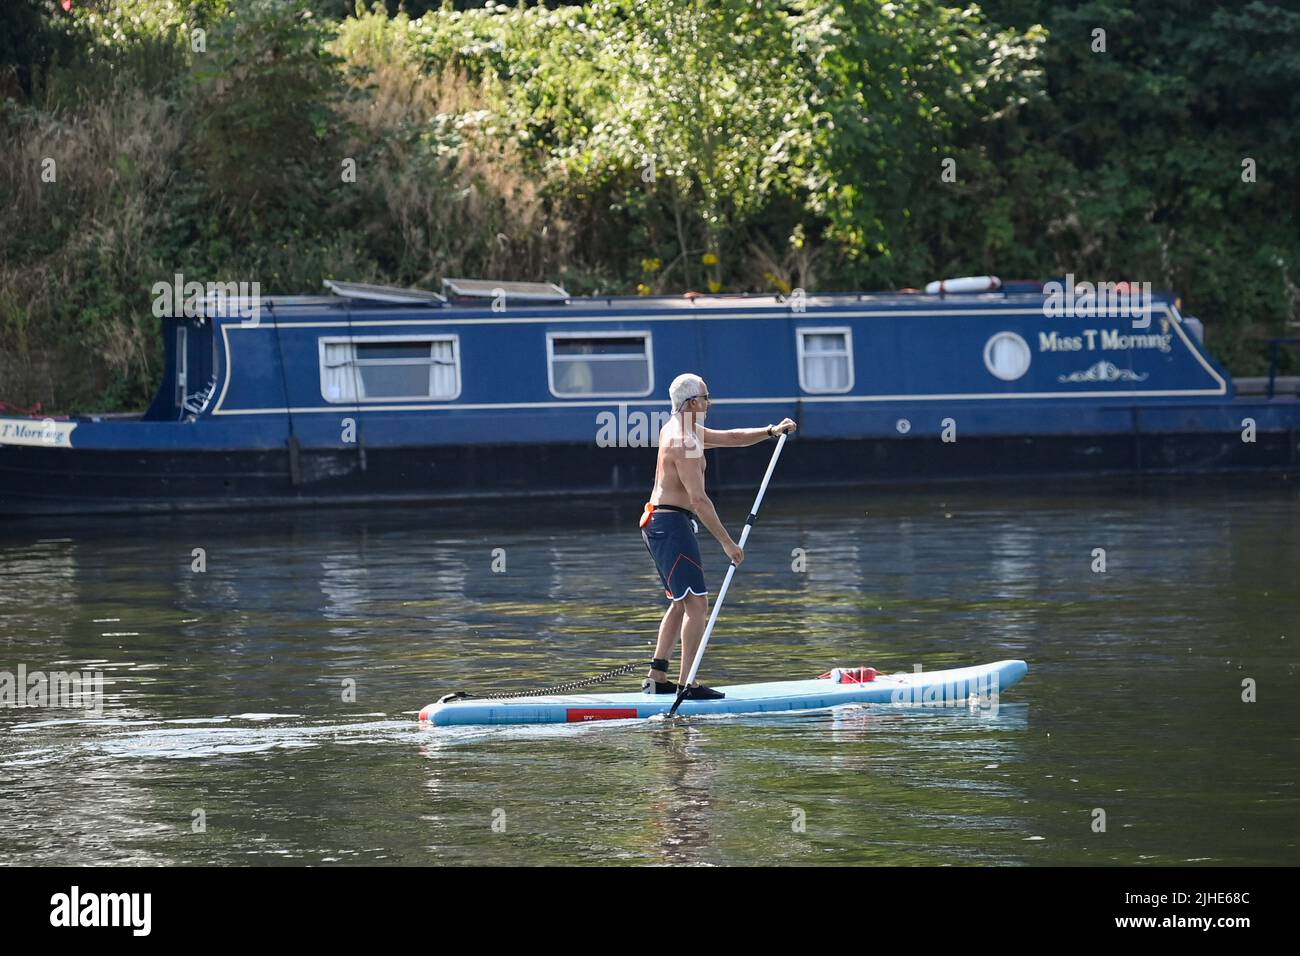 A man uses a stand-up paddleboard on the River Thames during the hot weather at Shepperton near Windsor, Britain, July 18, 2022. REUTERS/Toby Melville Stock Photo